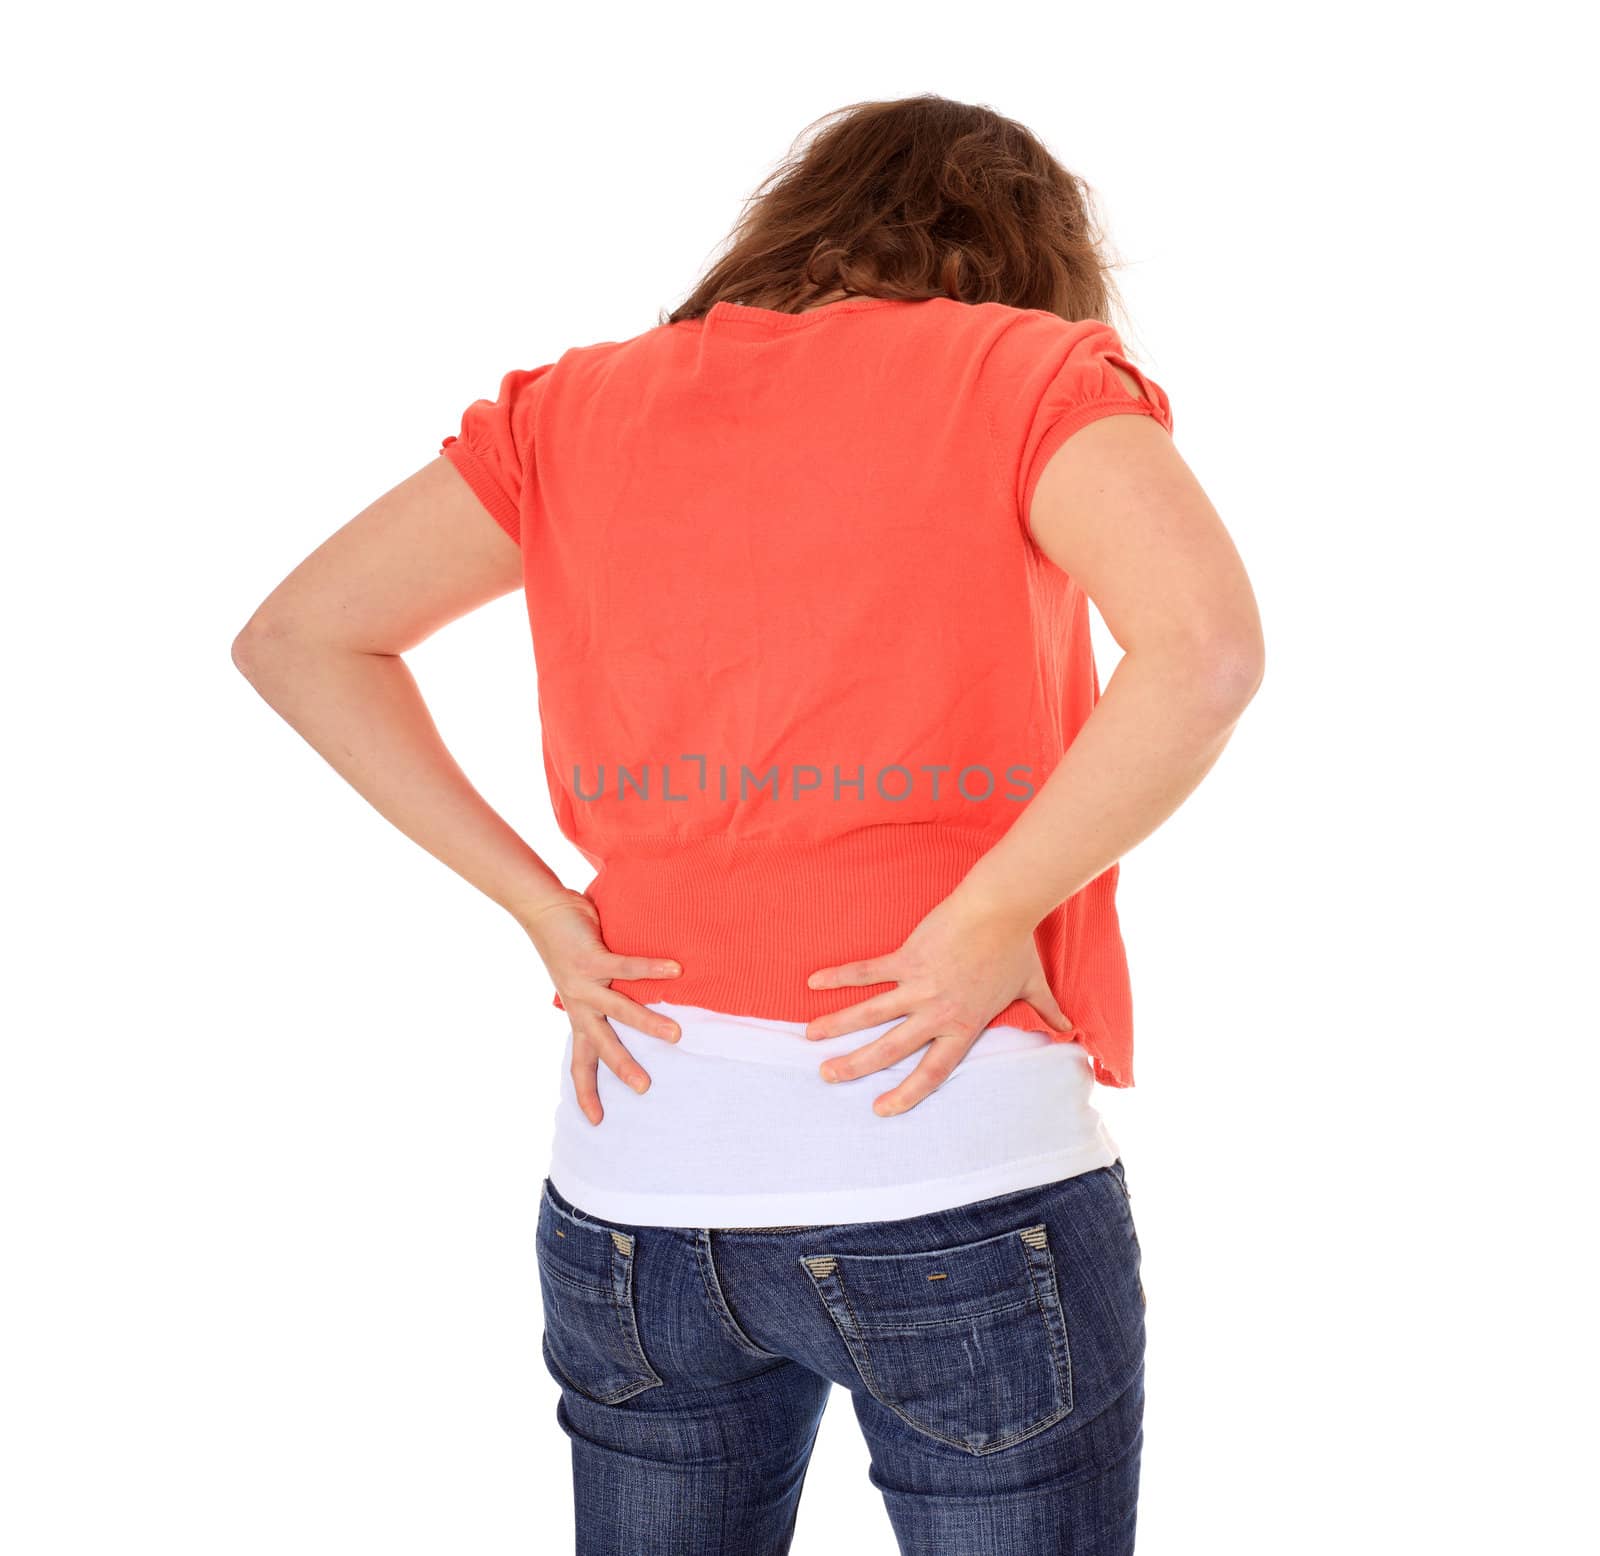 Attractive young woman suffering from back pain. All on white background.